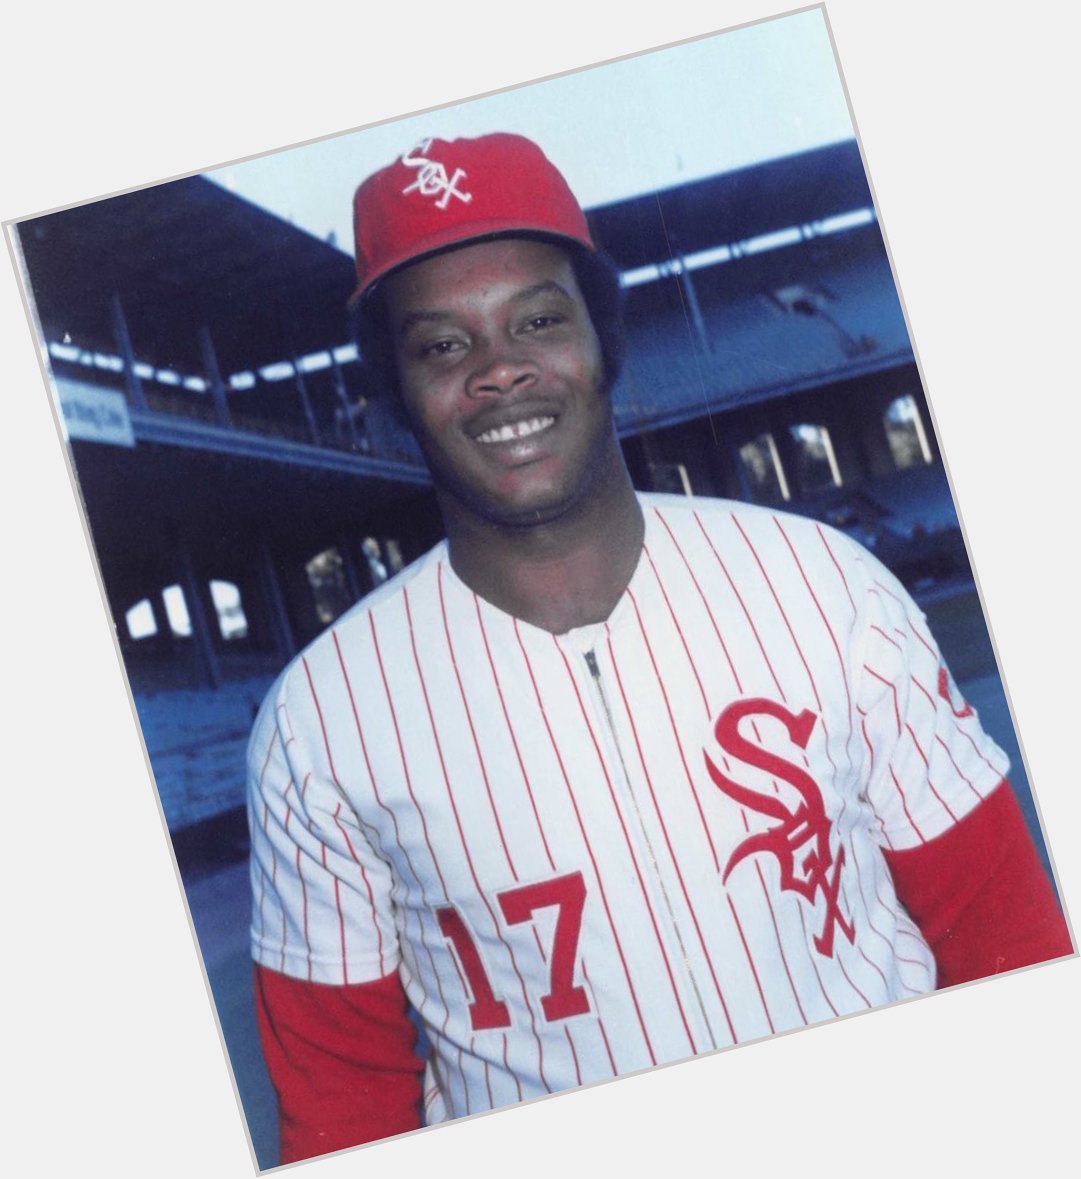 Happy Carlos May Day. The only major leaguer to ever wear his birthday on the back of his jersey. 